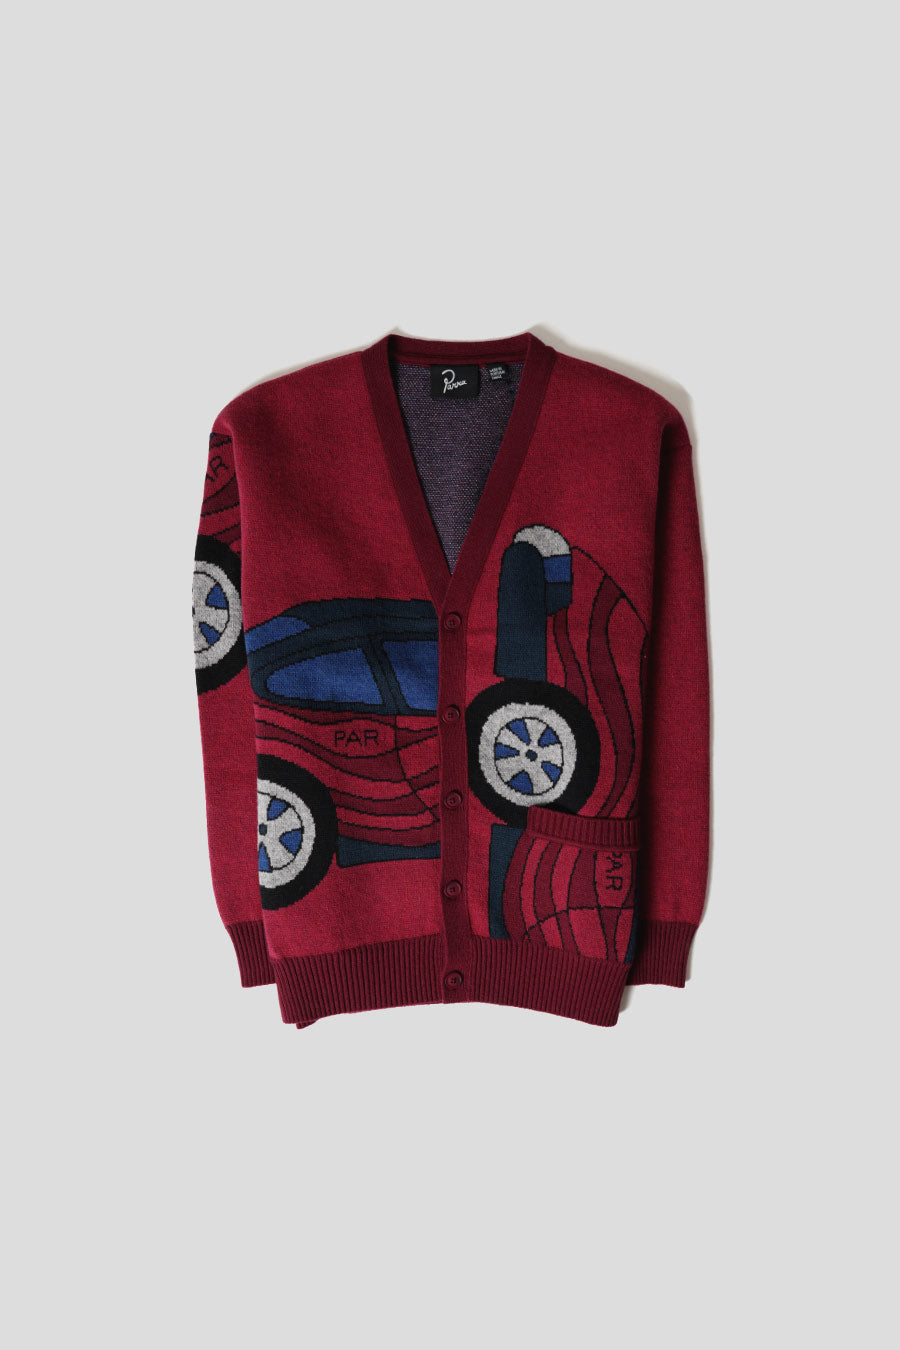 BY PARRA - NO PARKING KNITTED CARDIGAN RED - LE LABO STORE